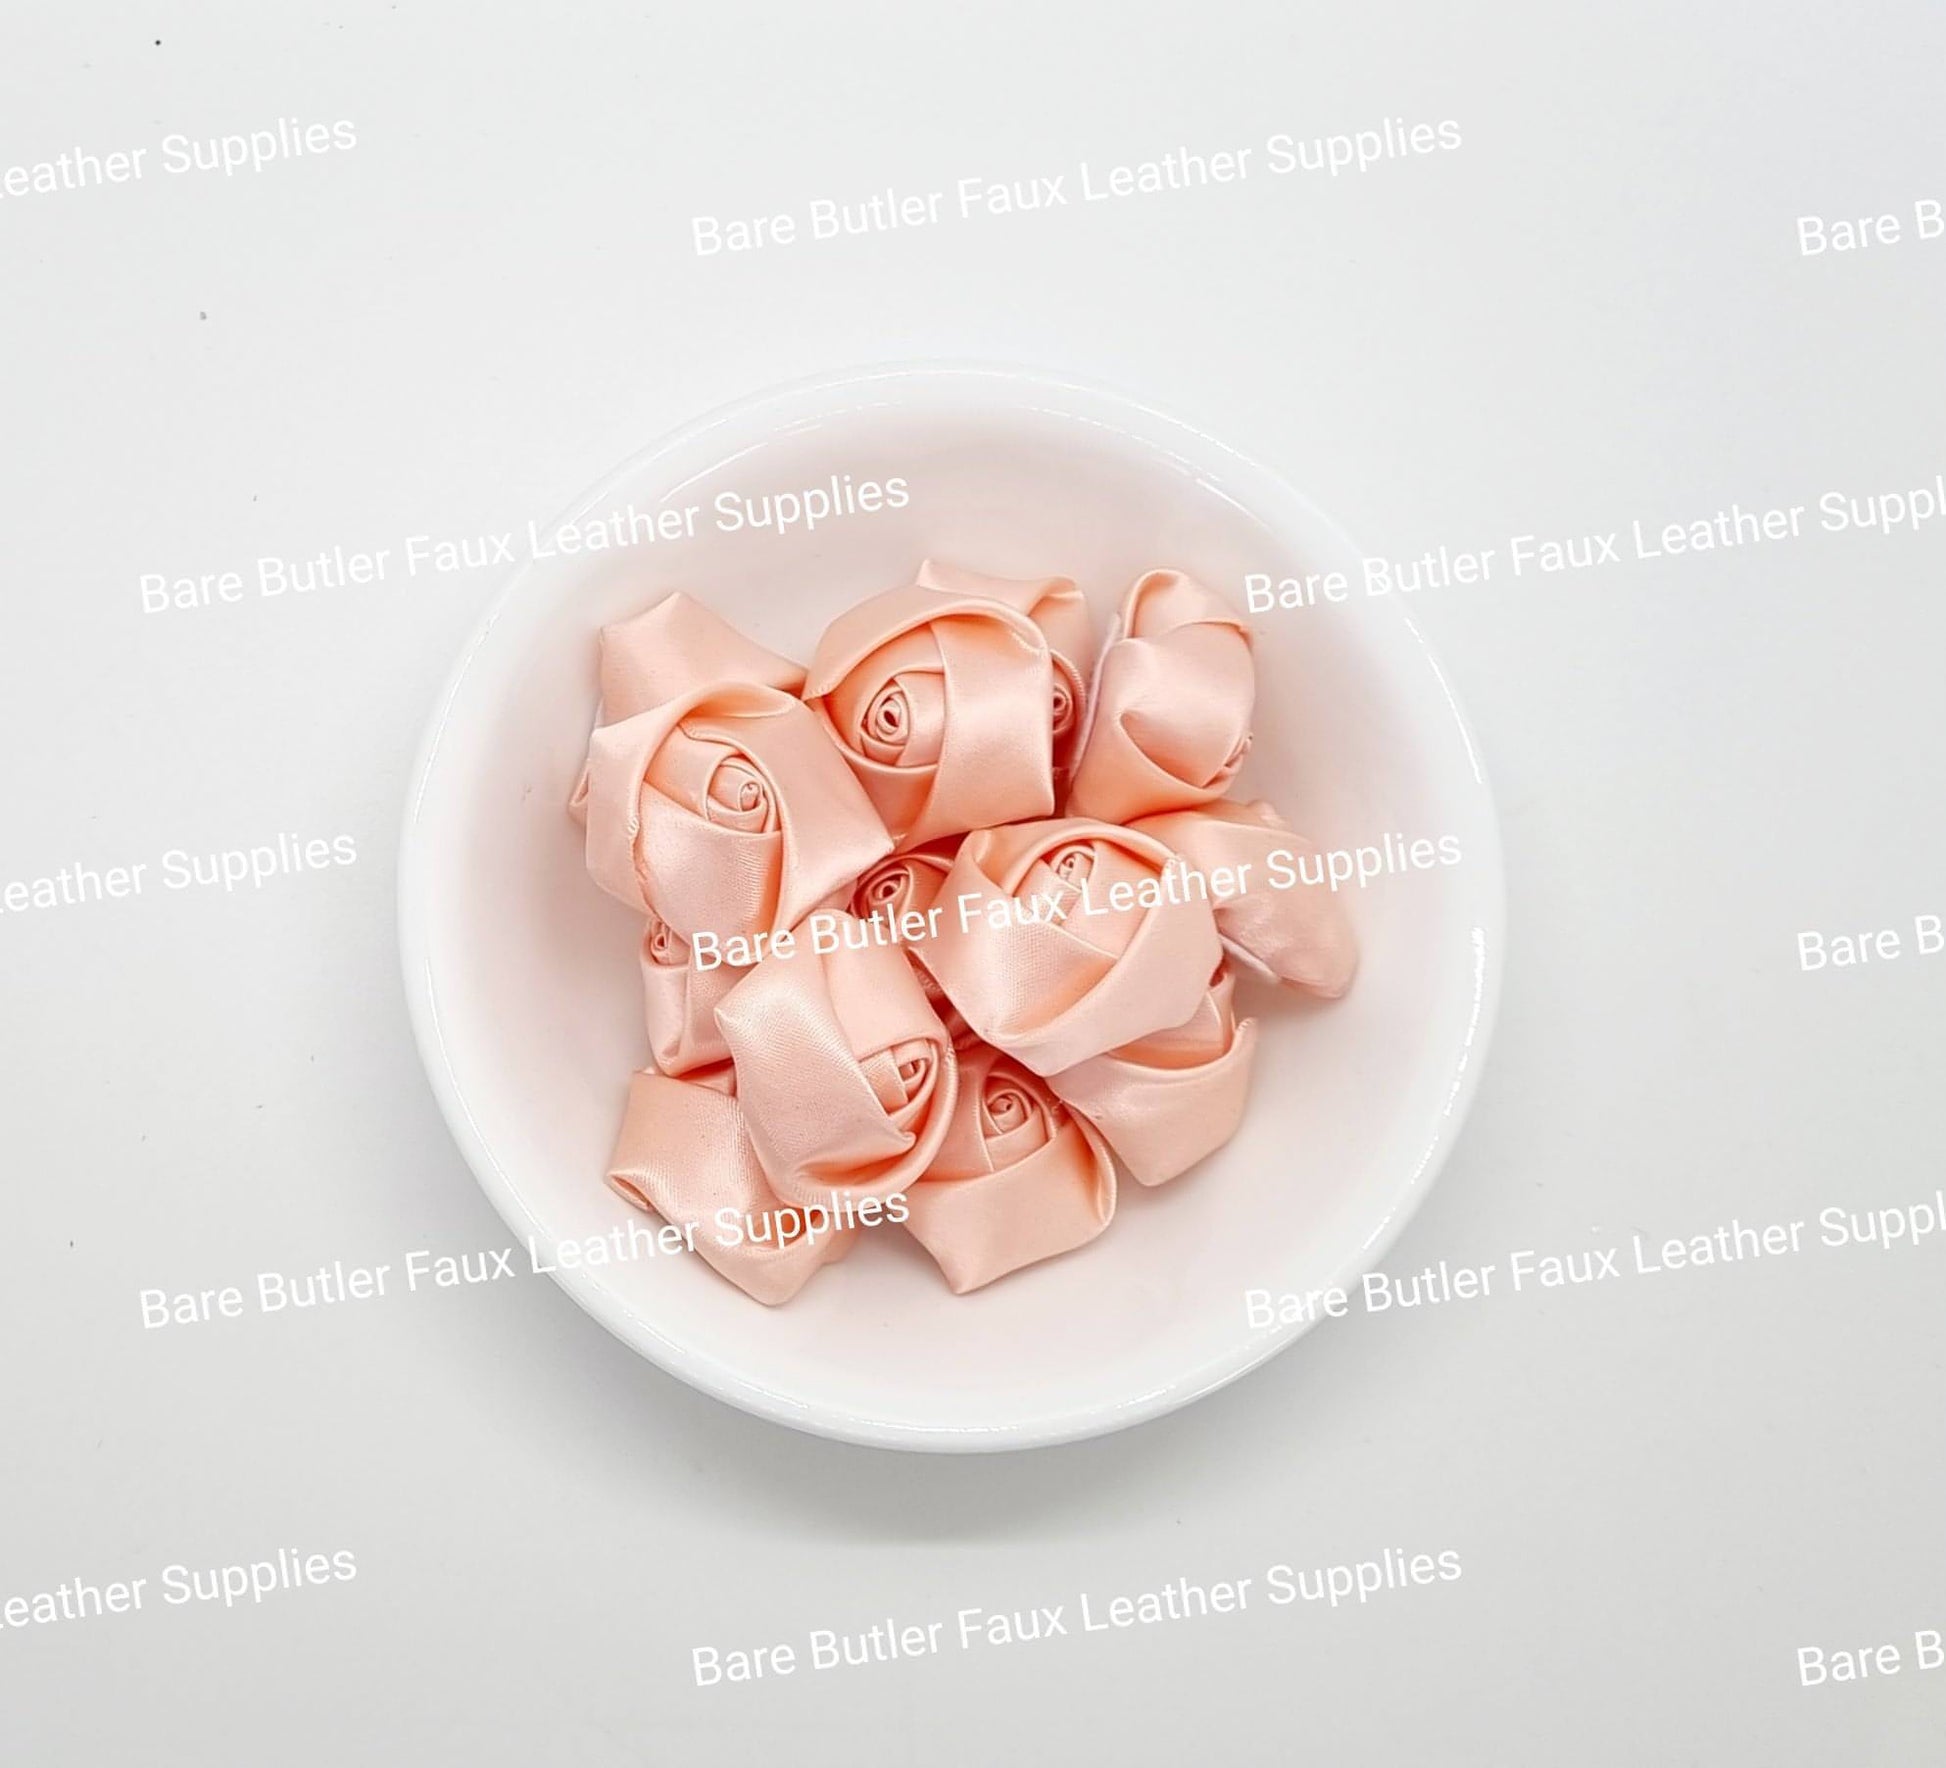 Satin Flower Buds - Peach - Bare Butler Faux Leather Supplies 